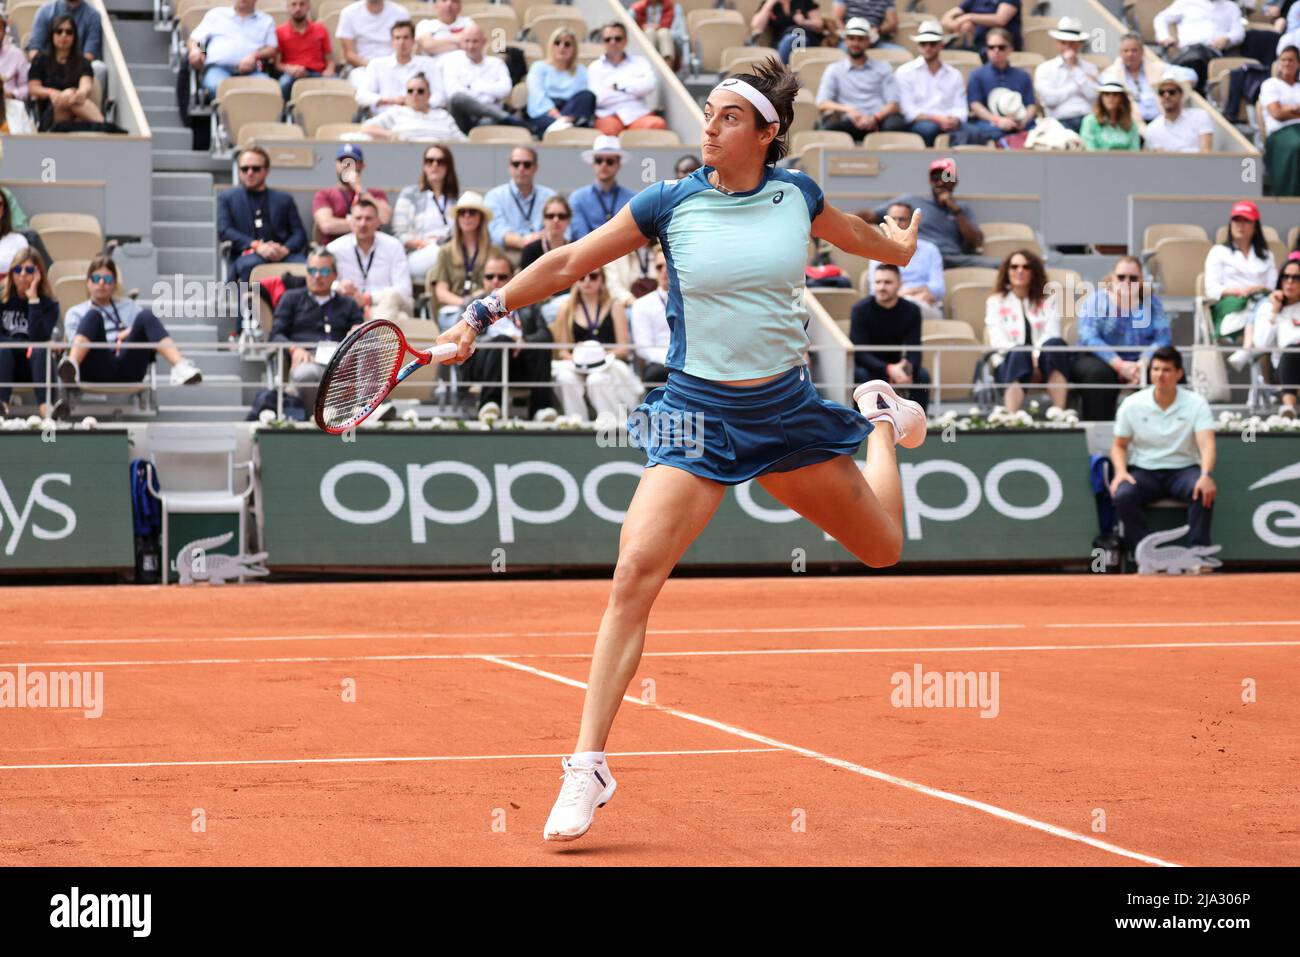 Paris, France. May 26, 2022, Caroline Garia playing during French Open Tennis Roland Garros 2022 on May 26, 2022 in Paris, France. Photo by Nasser Berzane/ABACAPRESS.COM Stock Photo